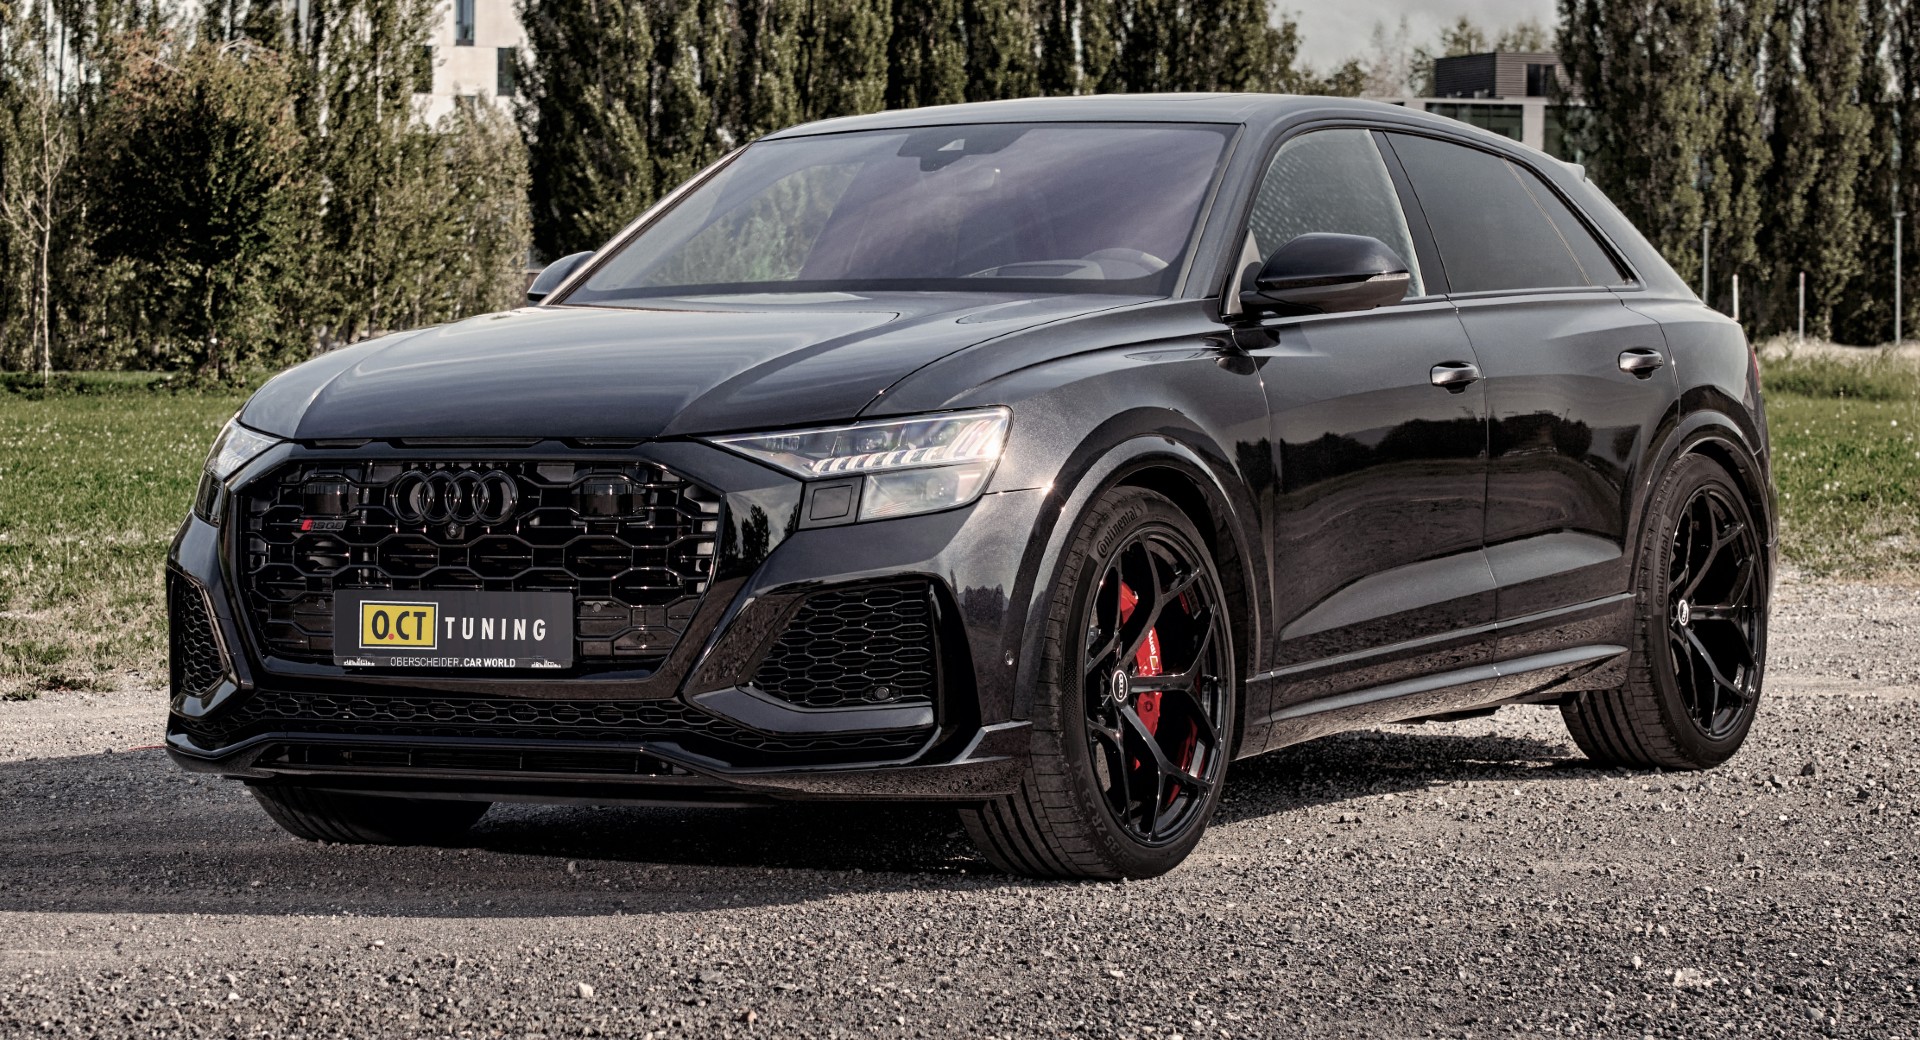 O.CT Tuning Takes The Audi RS Q8 Up To 791 HP, Adds 23-Inch Wheels